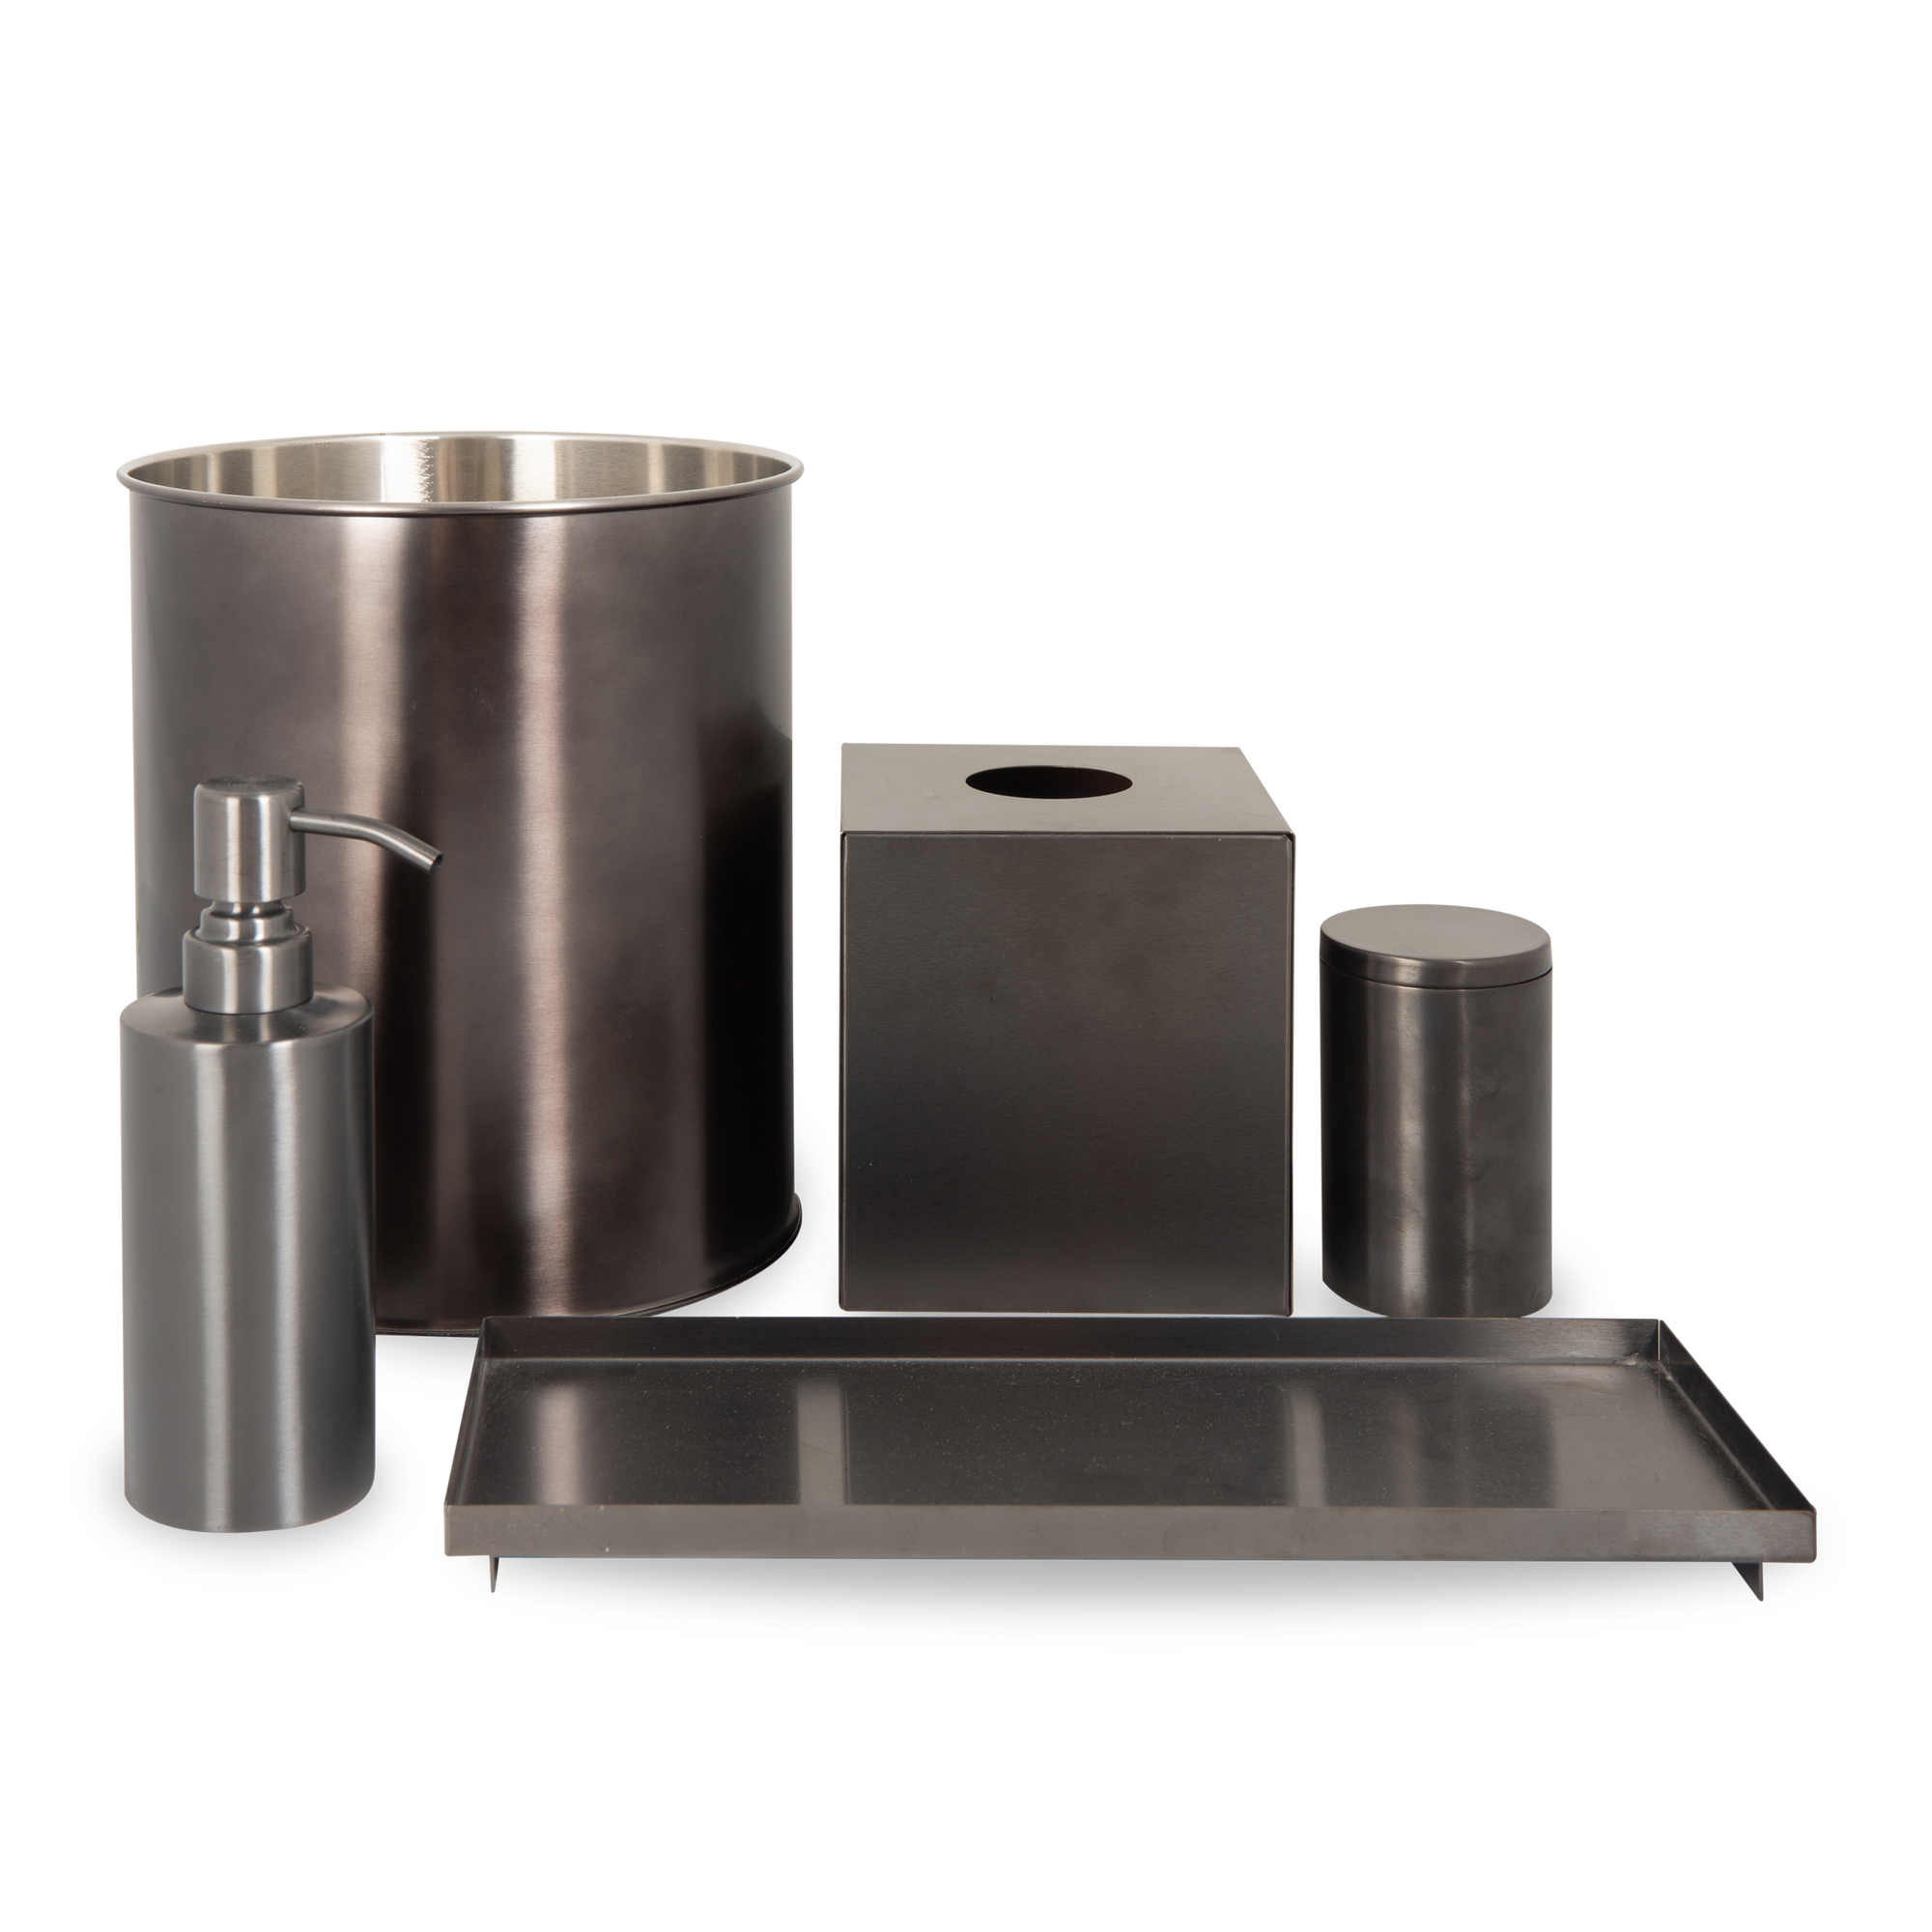 The Belize Collection features a  cutting-edge design created from the highest-quality stainless steel to ensure years of use.